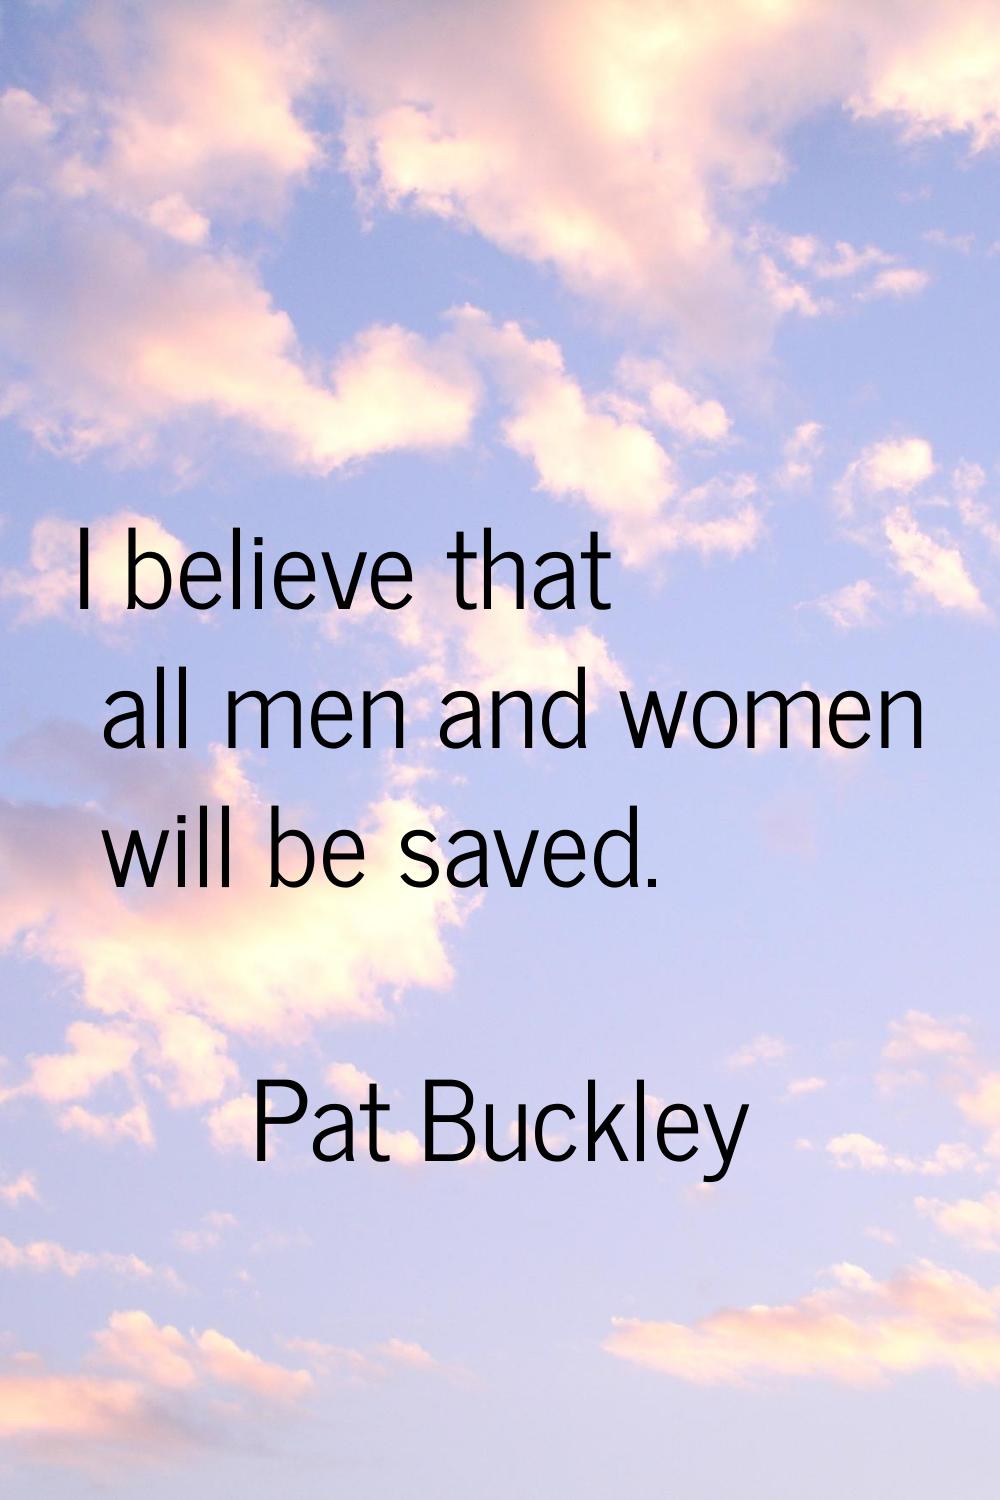 I believe that all men and women will be saved.